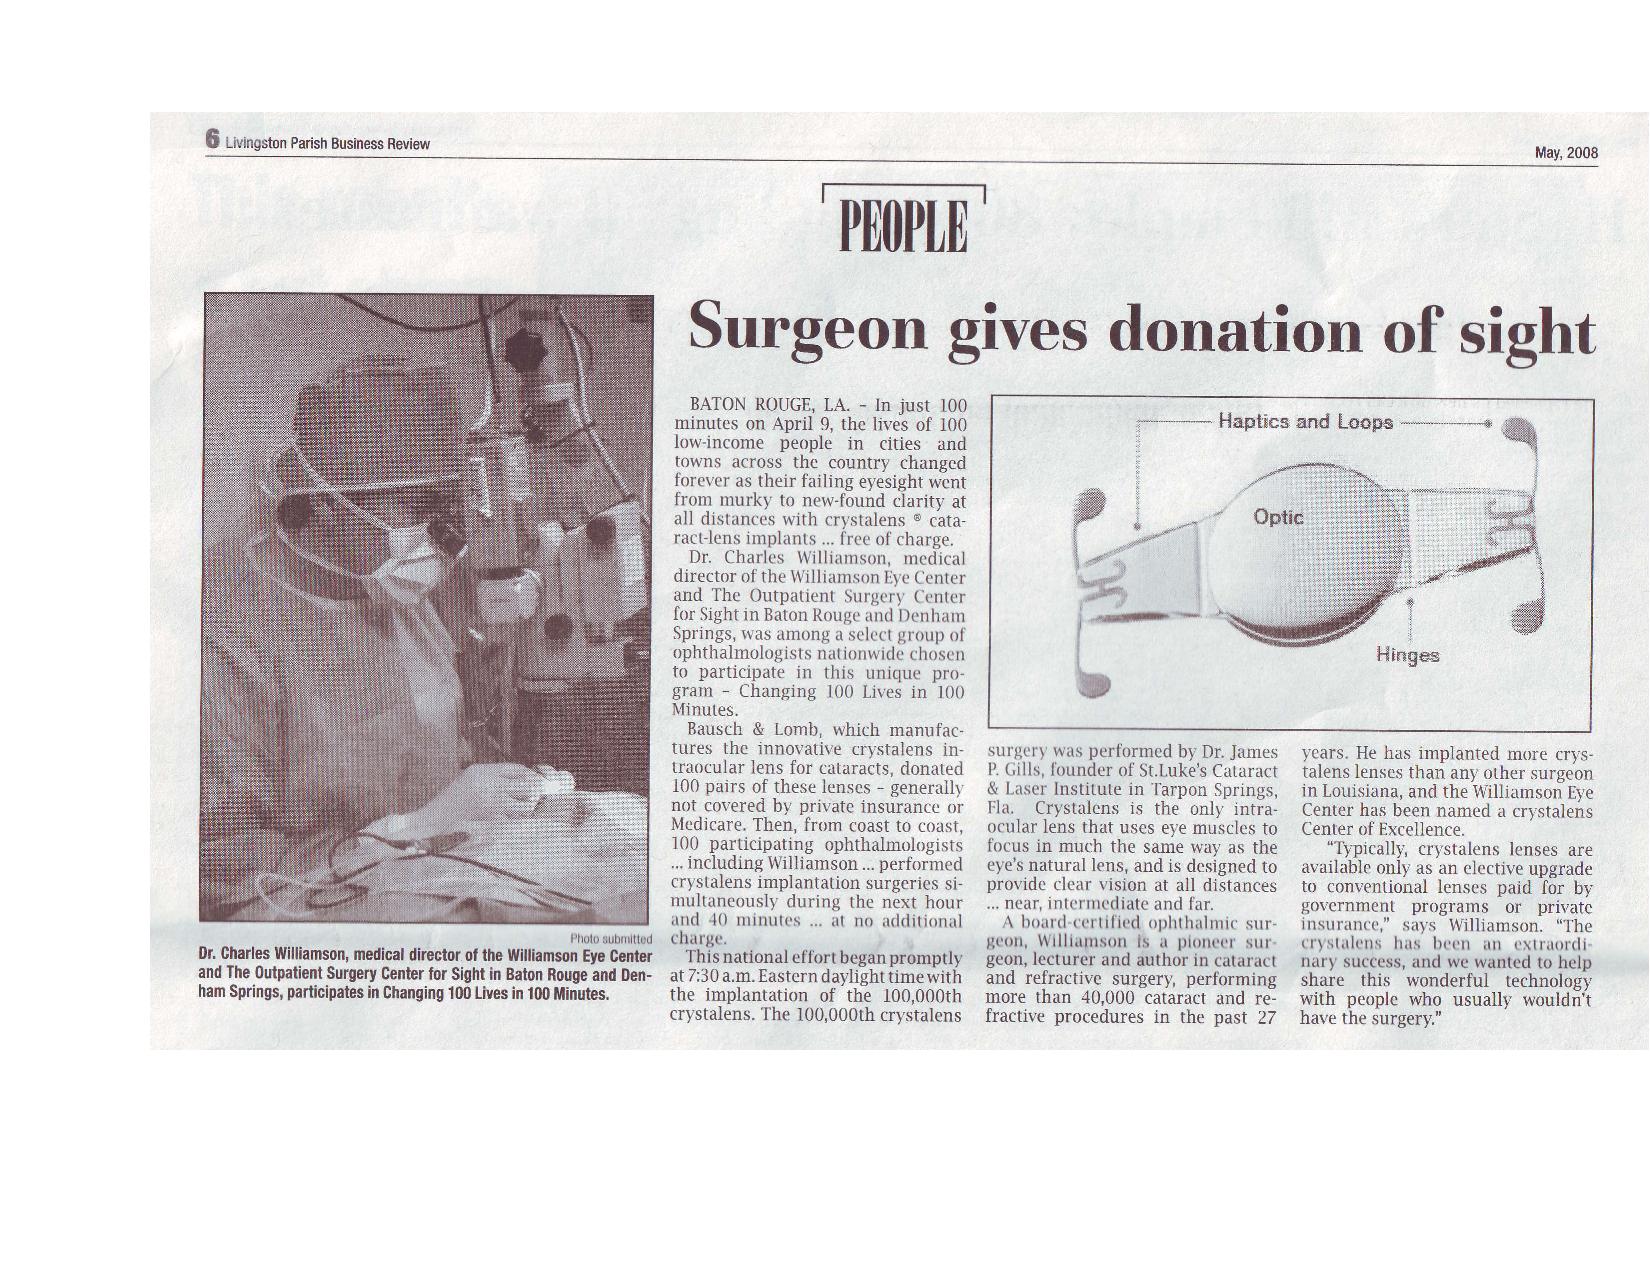 A photo of a newspaper article about Dr. Charles Williamson. The text speaks of him helping 100 people by giving them cataract surgery.